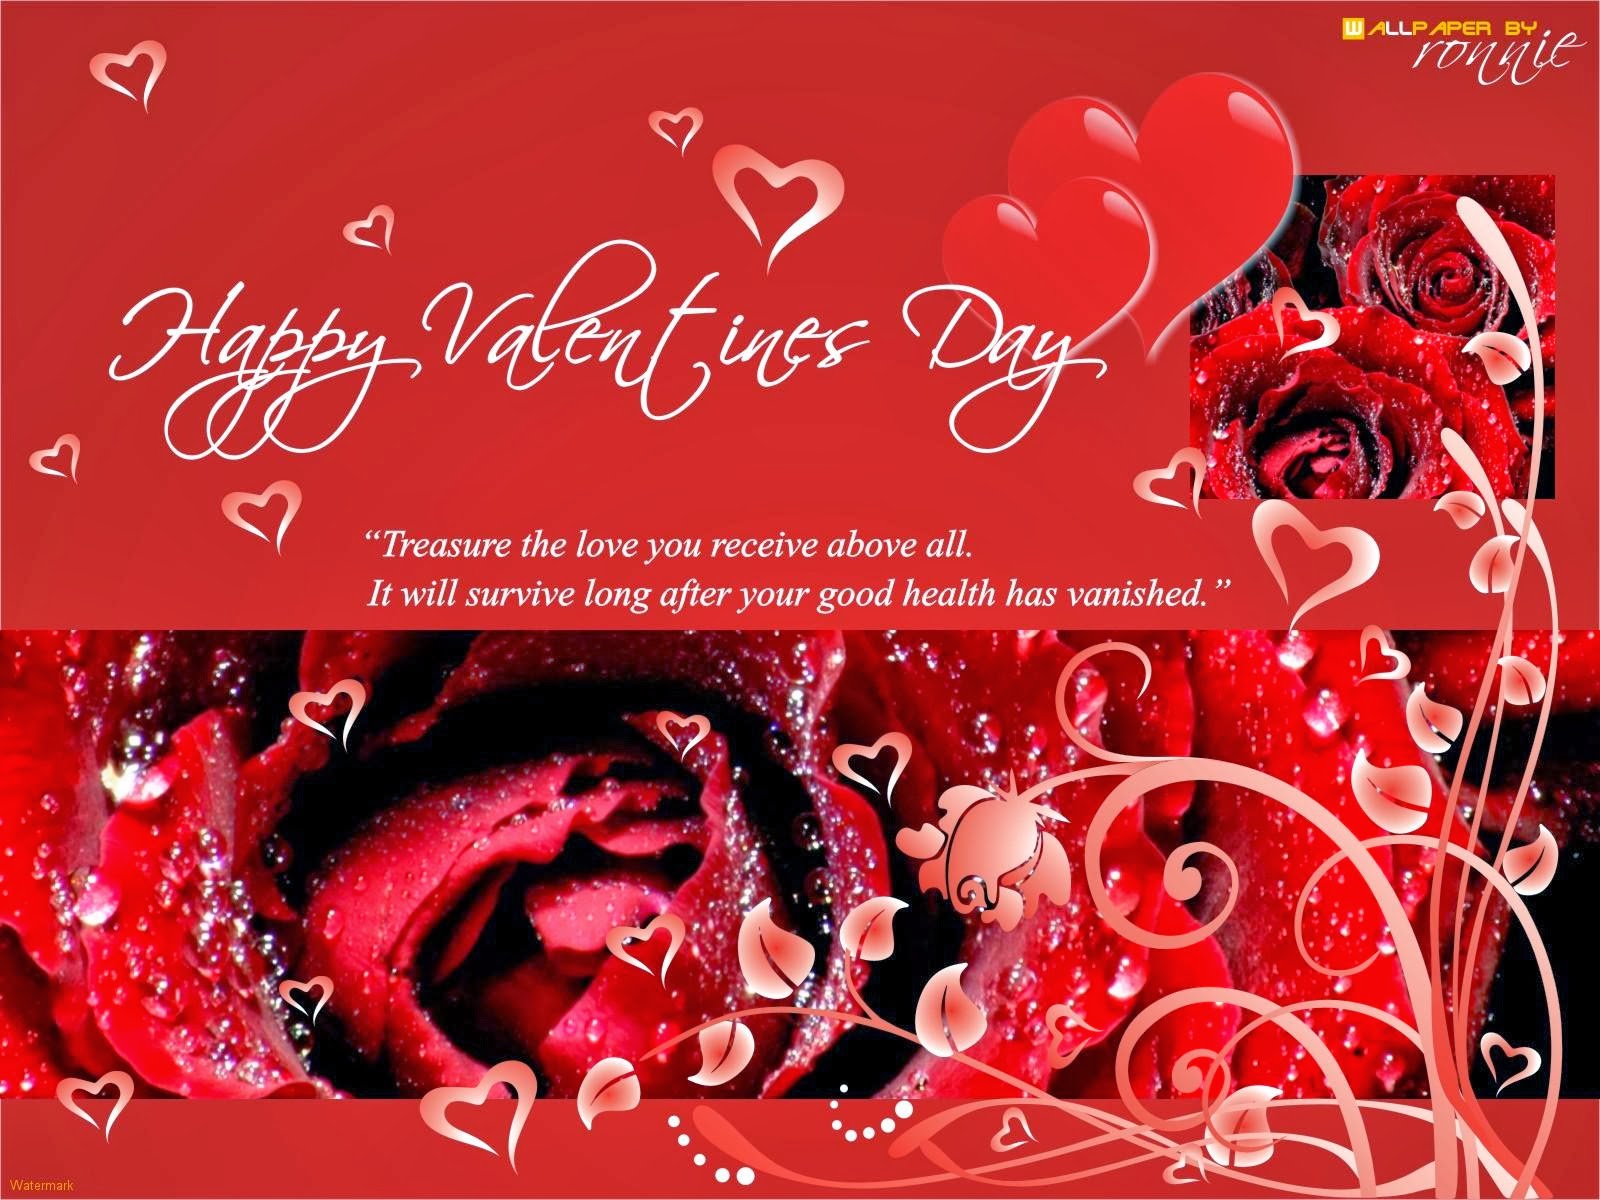 2014 Valentines Day Wallpapers | 14 February 2014 Wallpapers